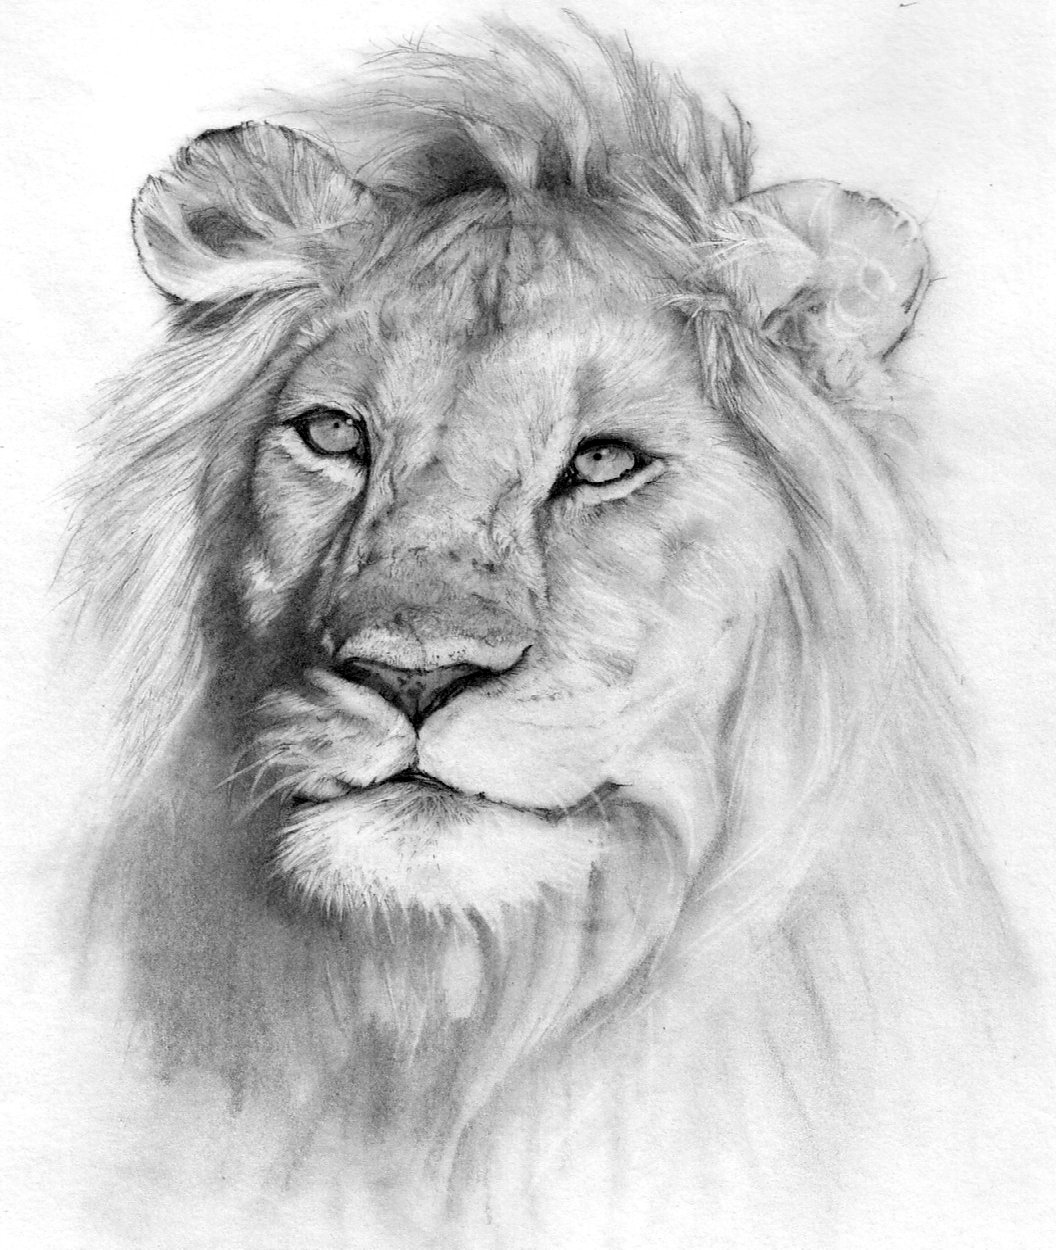 List 99+ Images pictures of lions to draw Completed